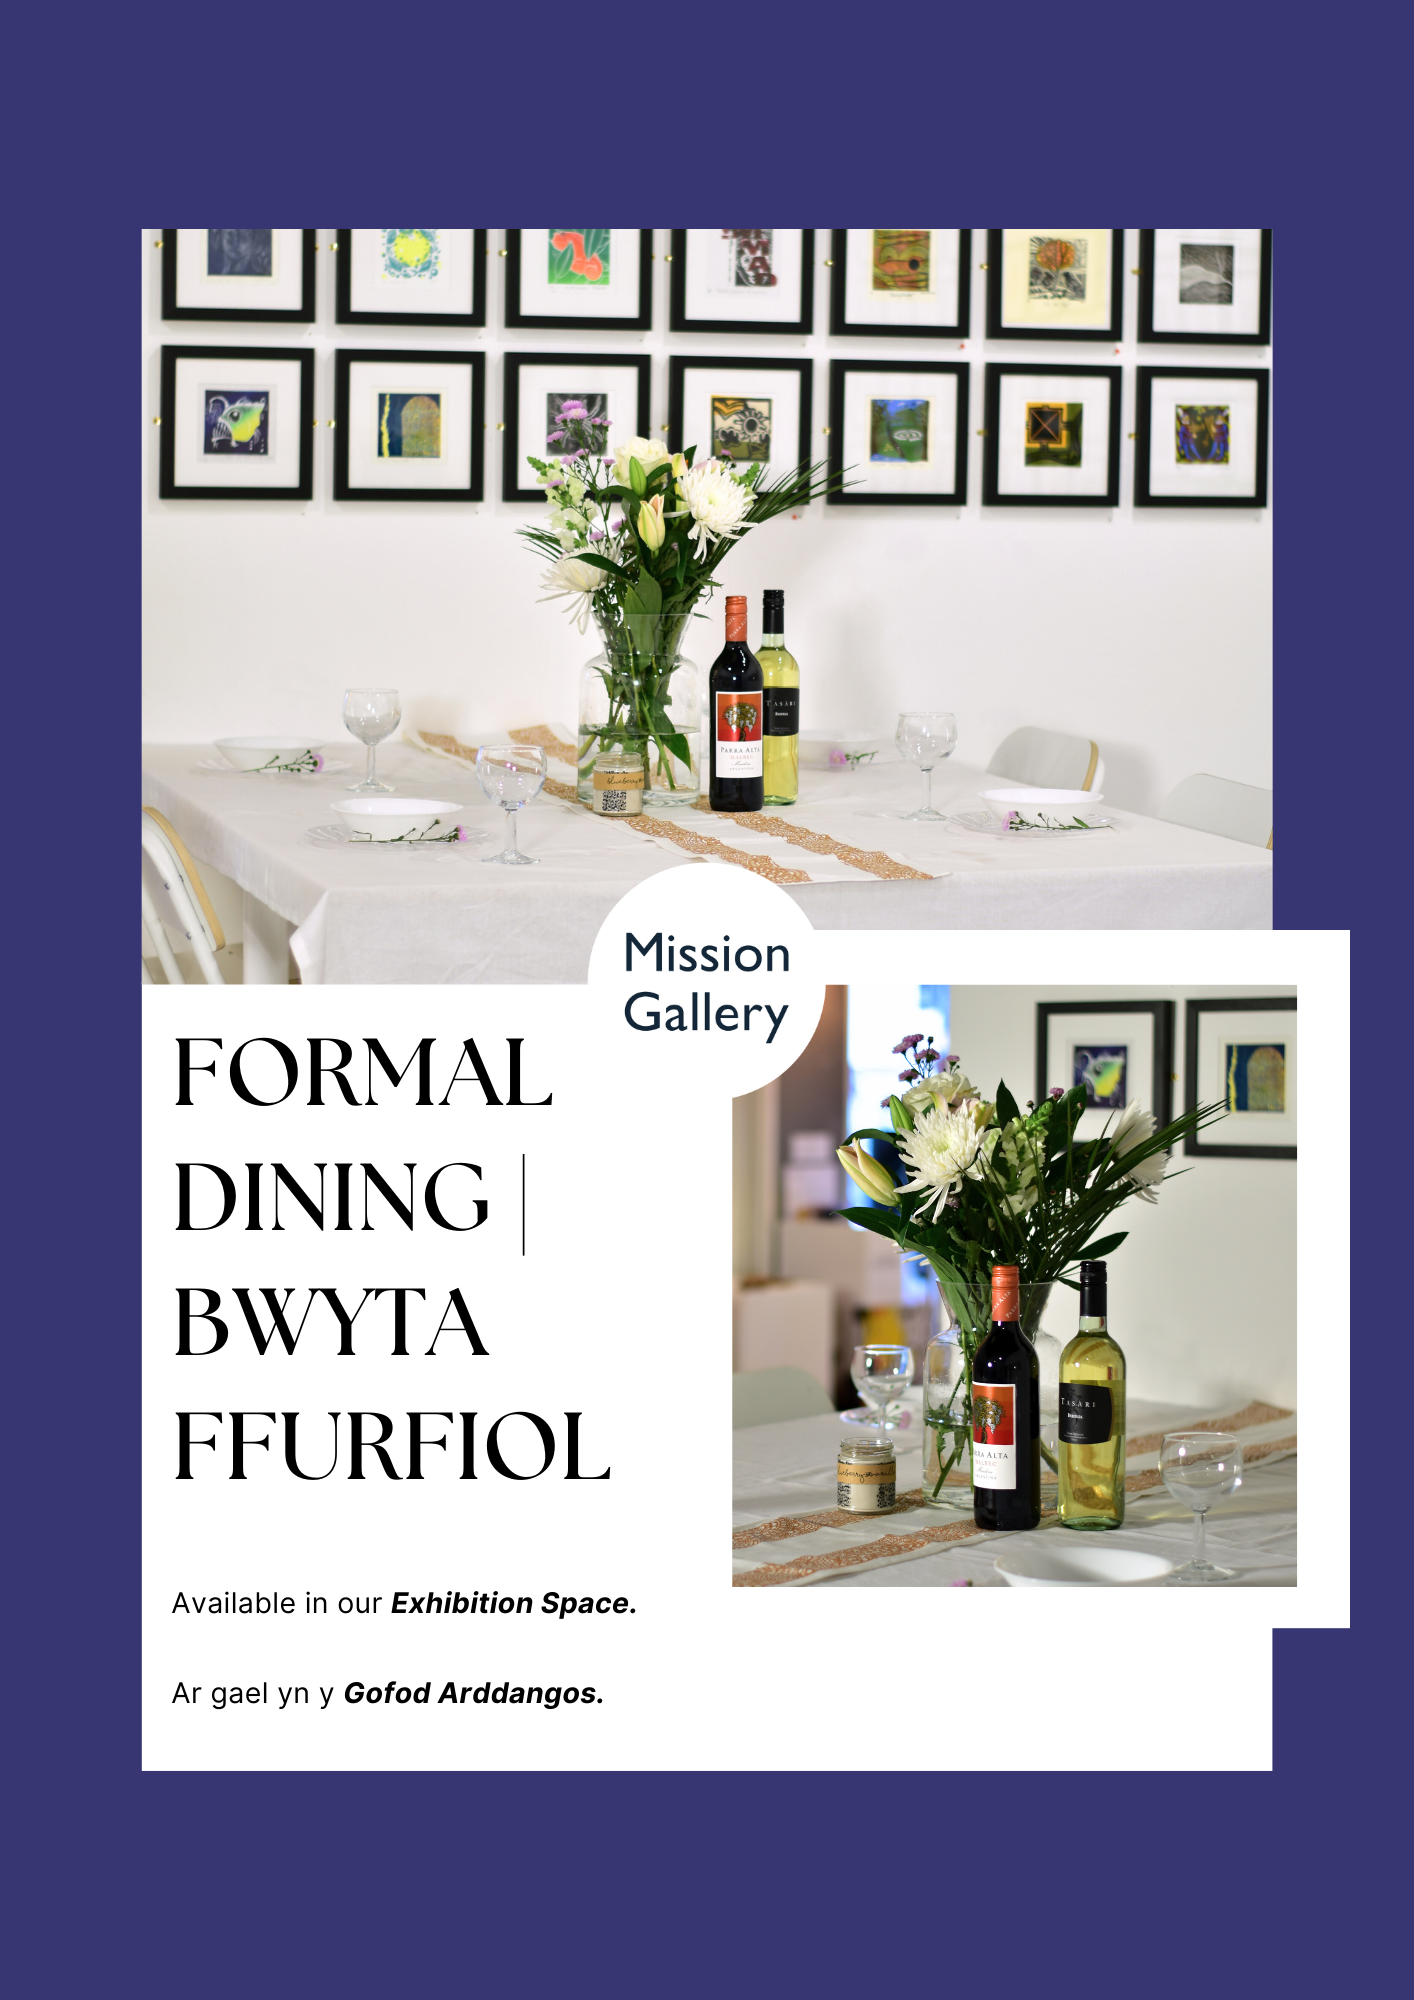 Mission Gallery Venue Hire Pack, formal dining